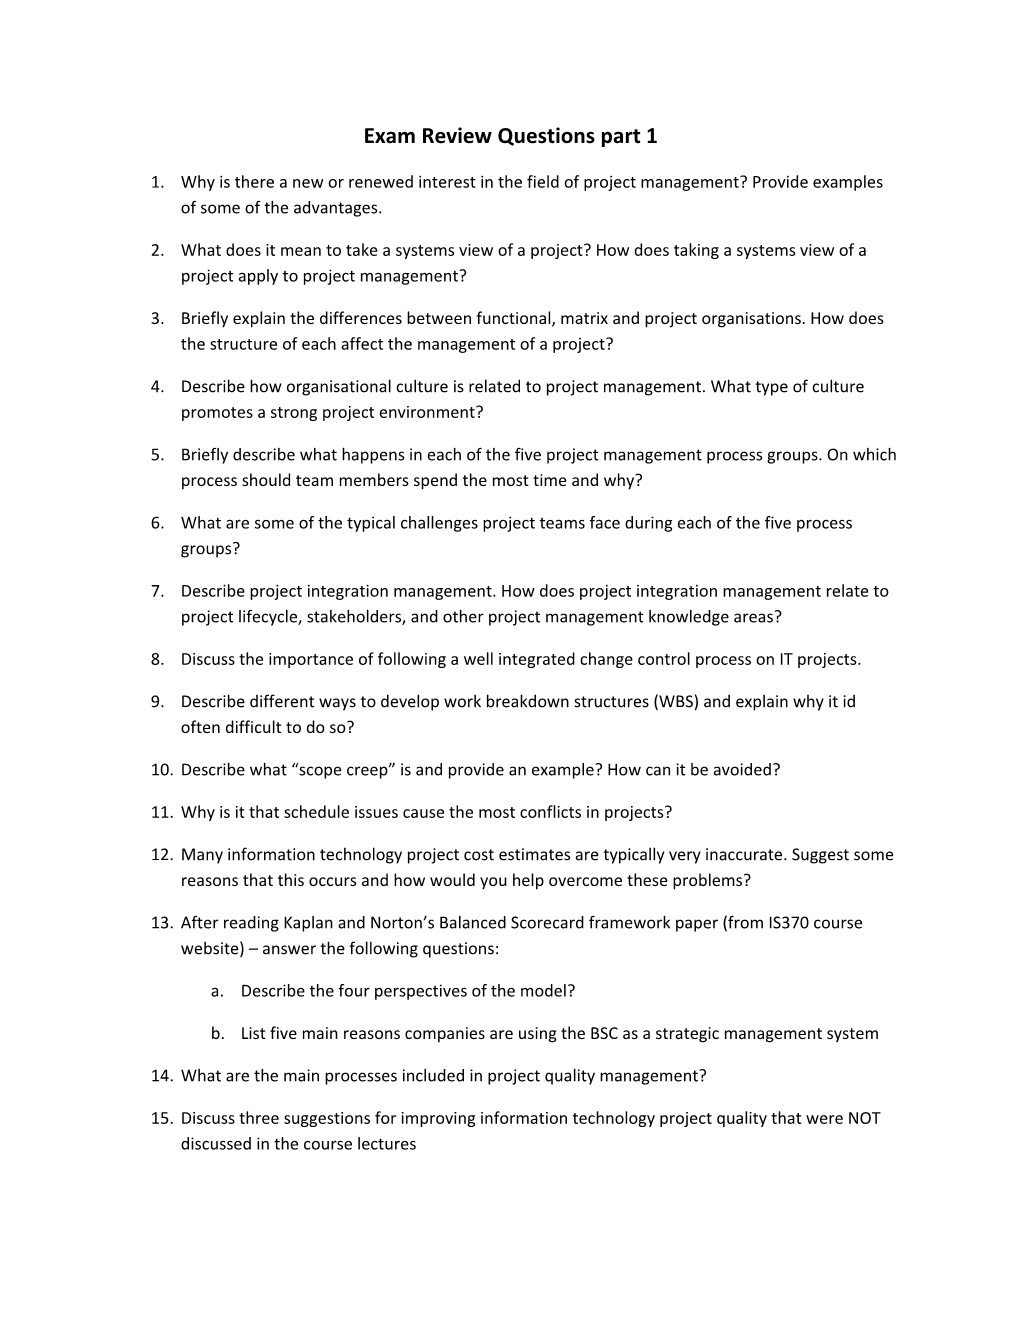 Exam Review Questions Part 1